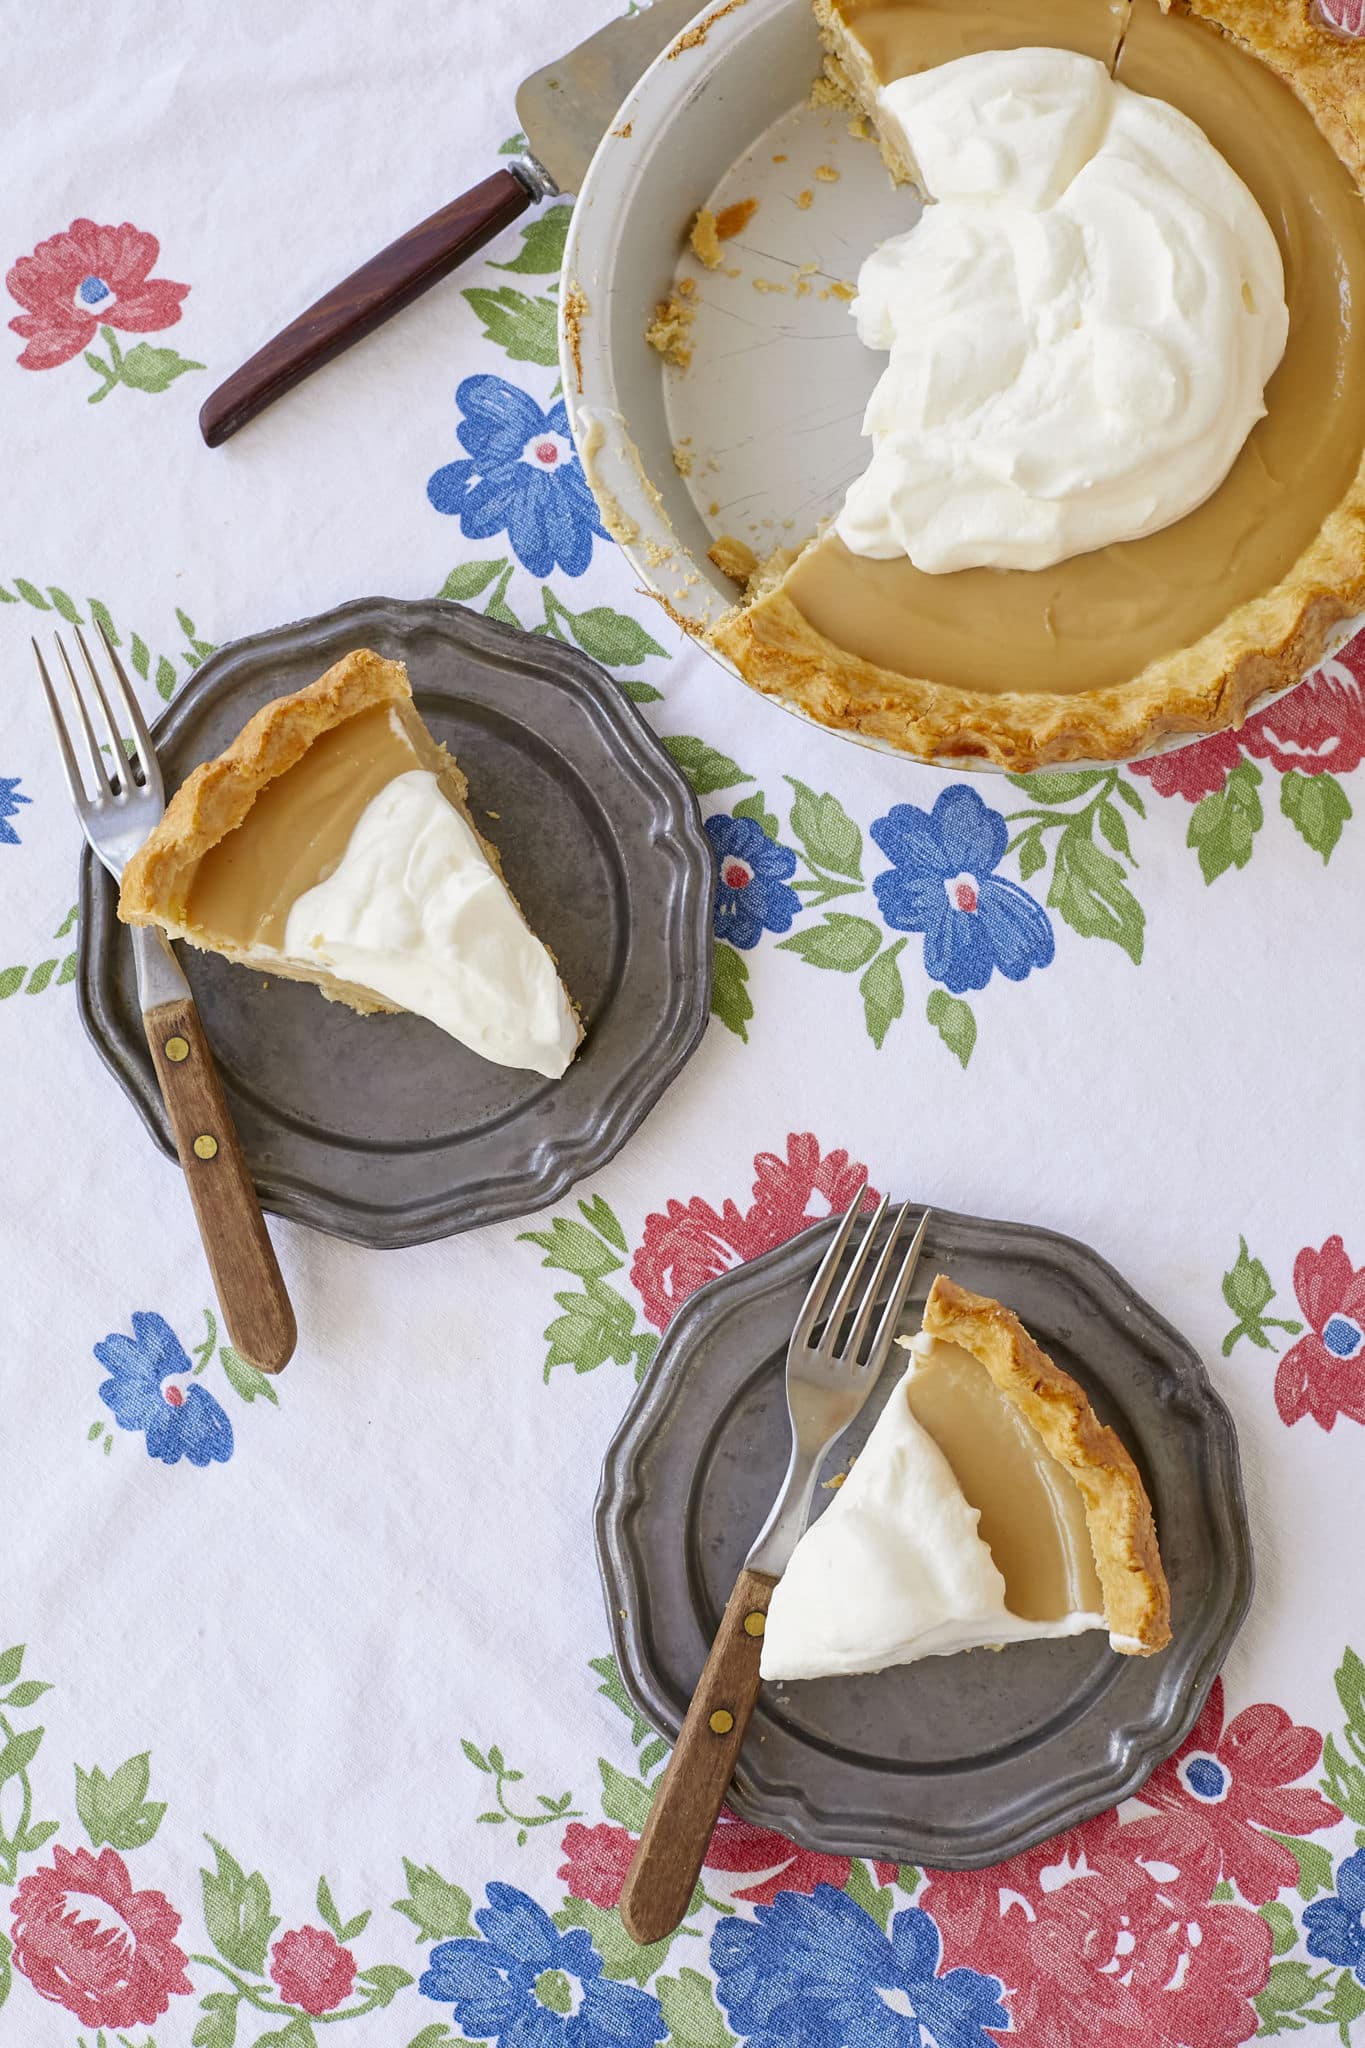 Two slices of creamy Maple Cream Pie are served on plates next to the pie tin.